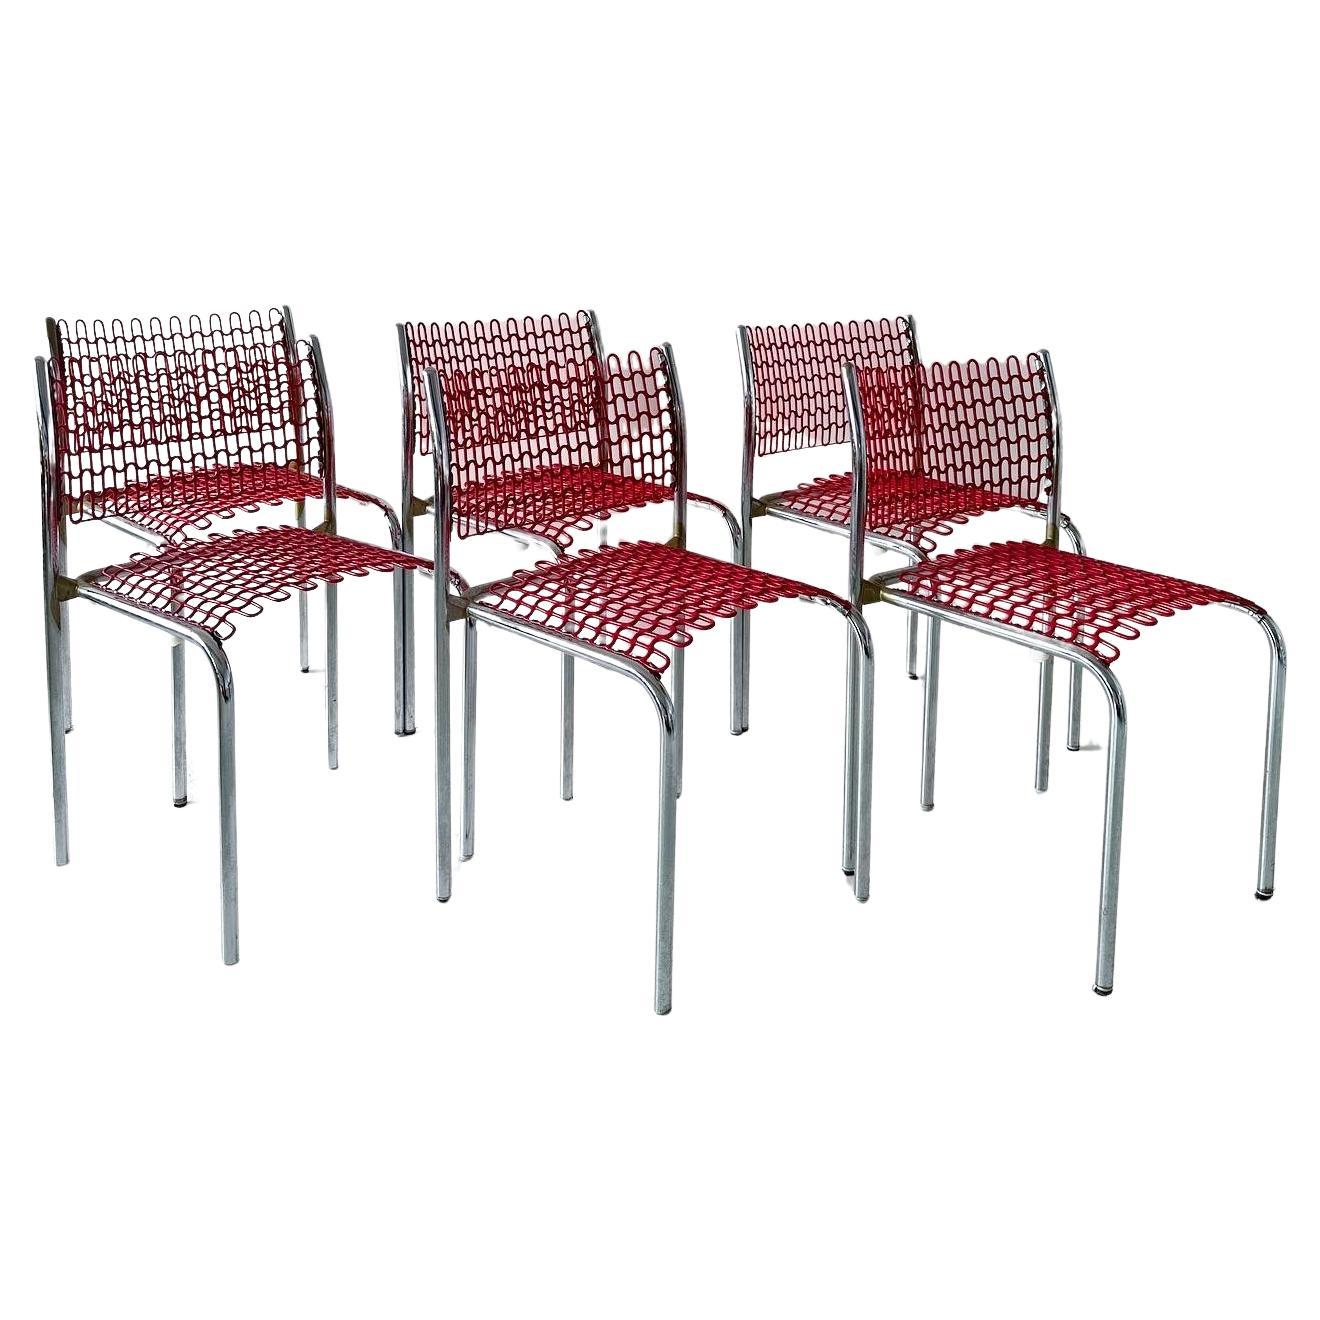 Red Sof Tech Chairs by David Rowland for Thonet (set of 4) (8 available)